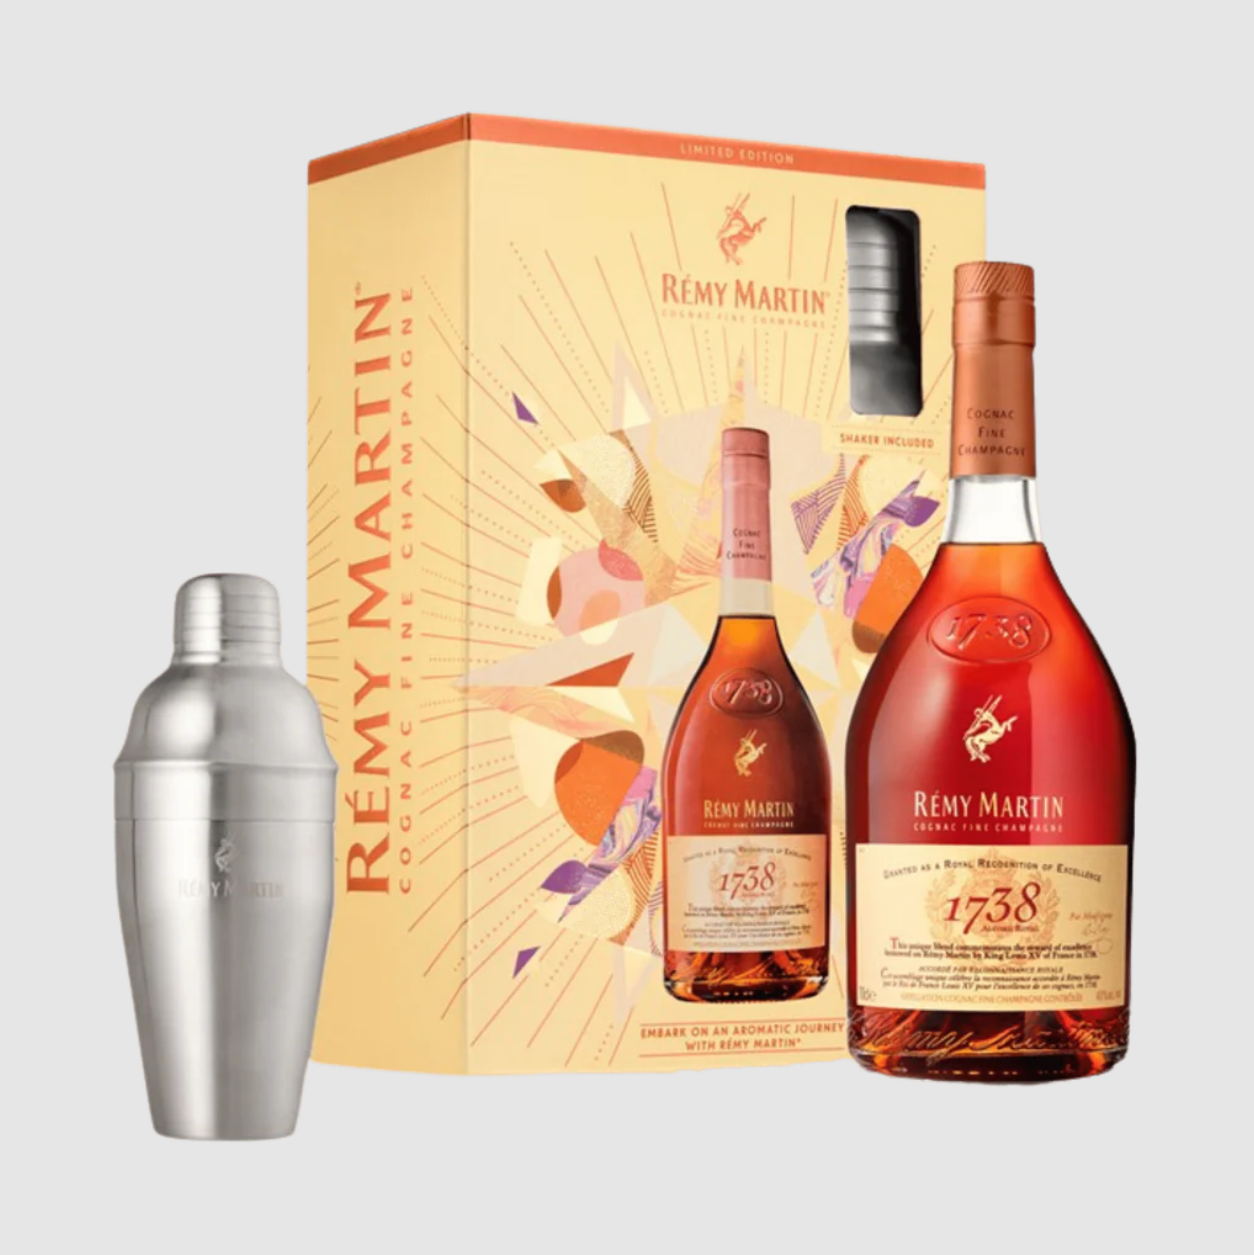 Father's Day Gift Ideas - Remy Martin 1738 Accord Royal Limited Edition Gift Box